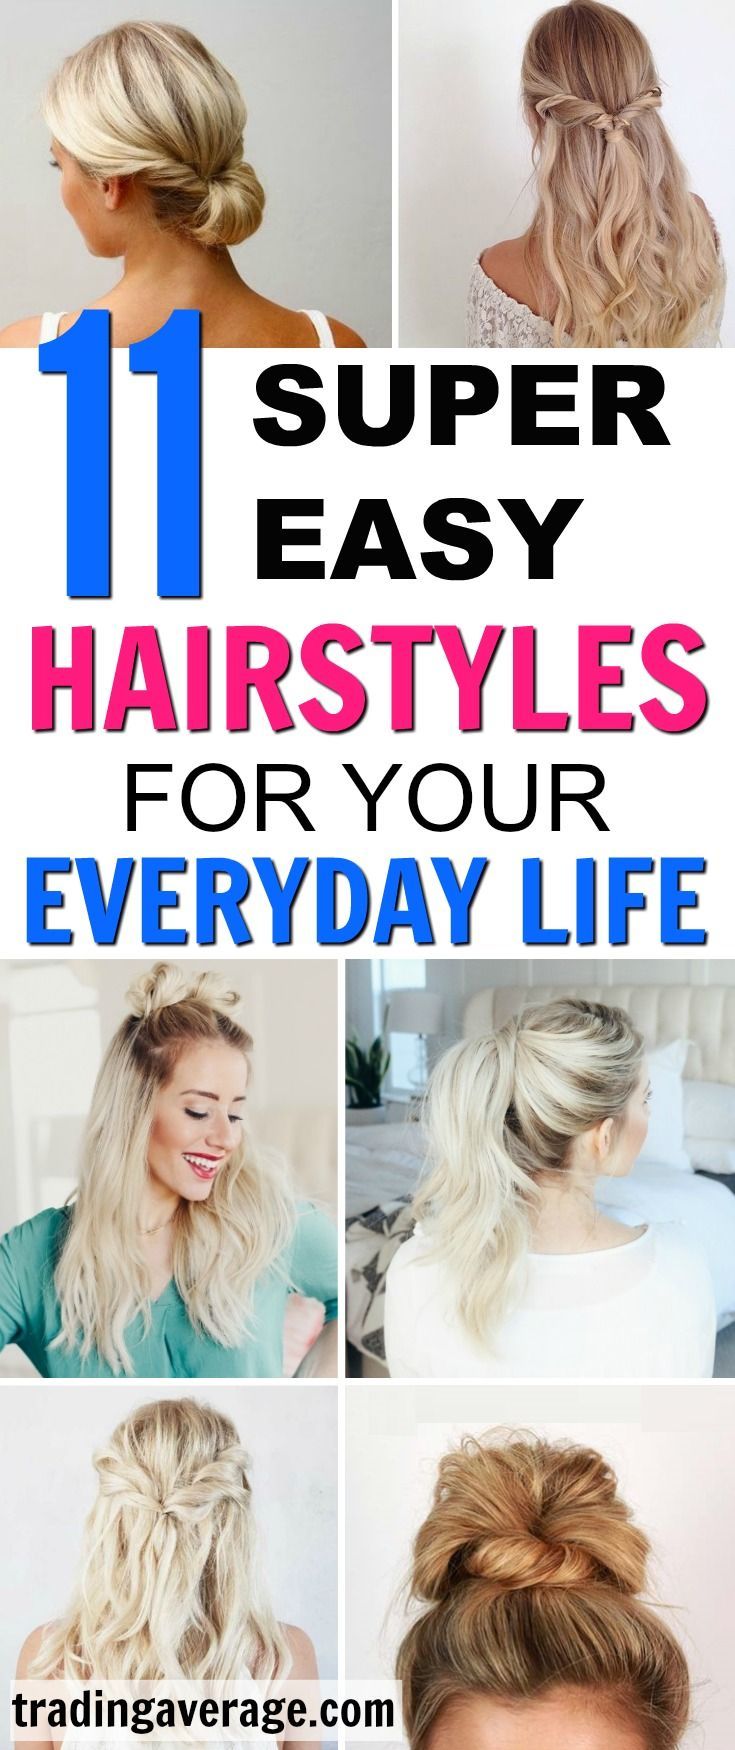 11 Super Easy Hairstyles for Everyday Life -   15 quick hairstyles ideas